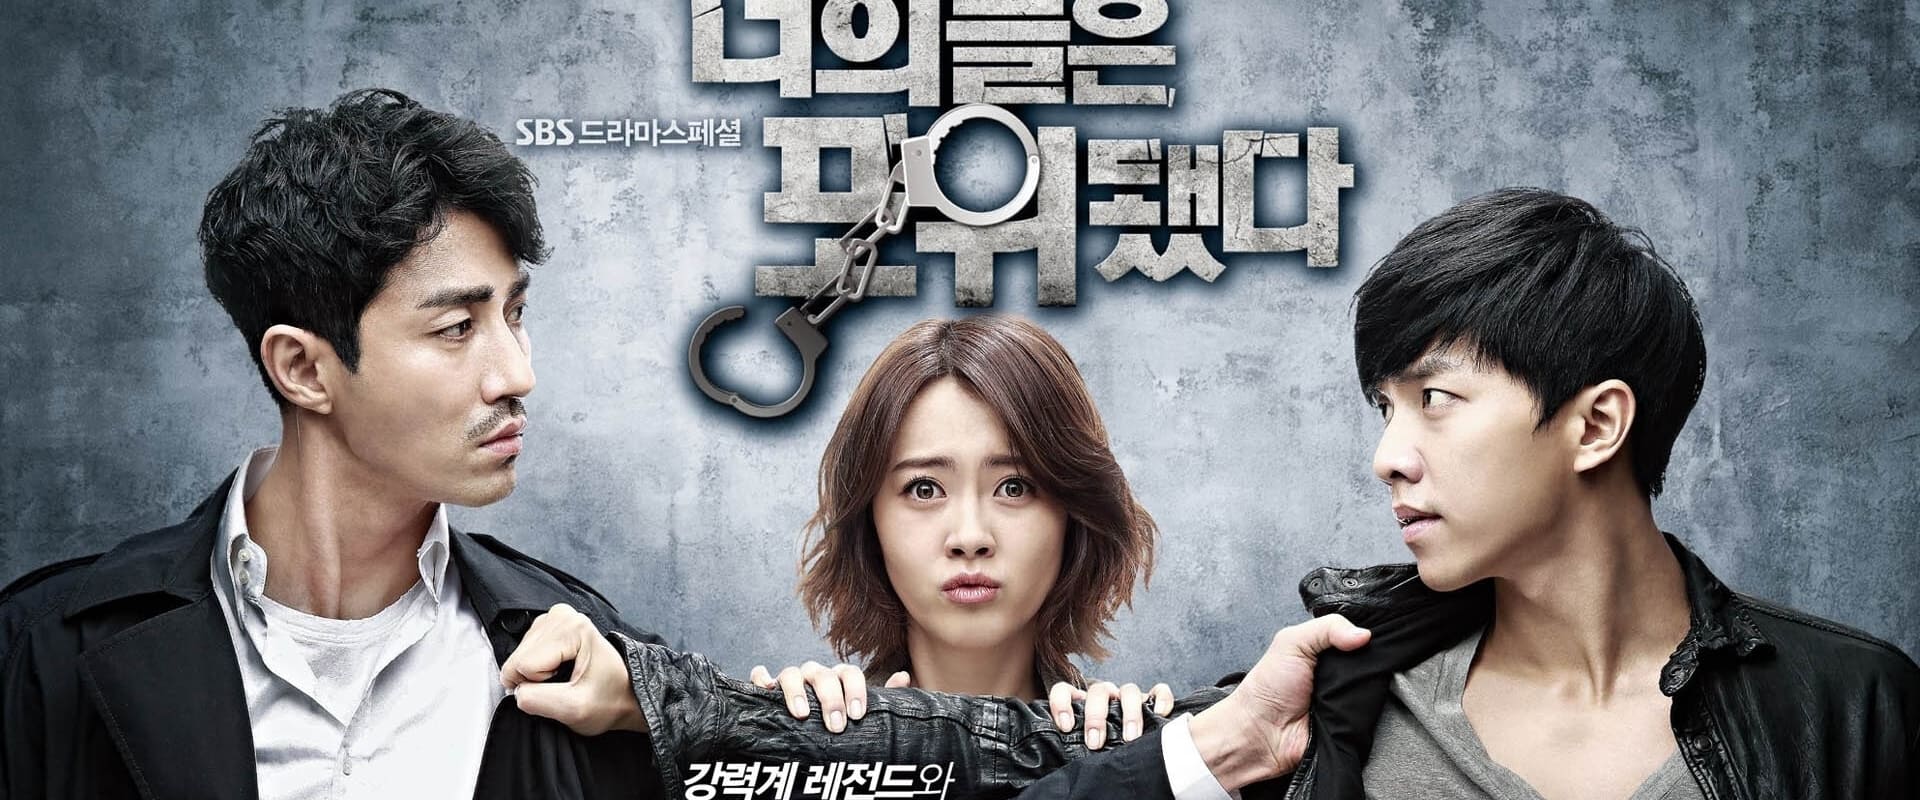 You Are All Surrounded